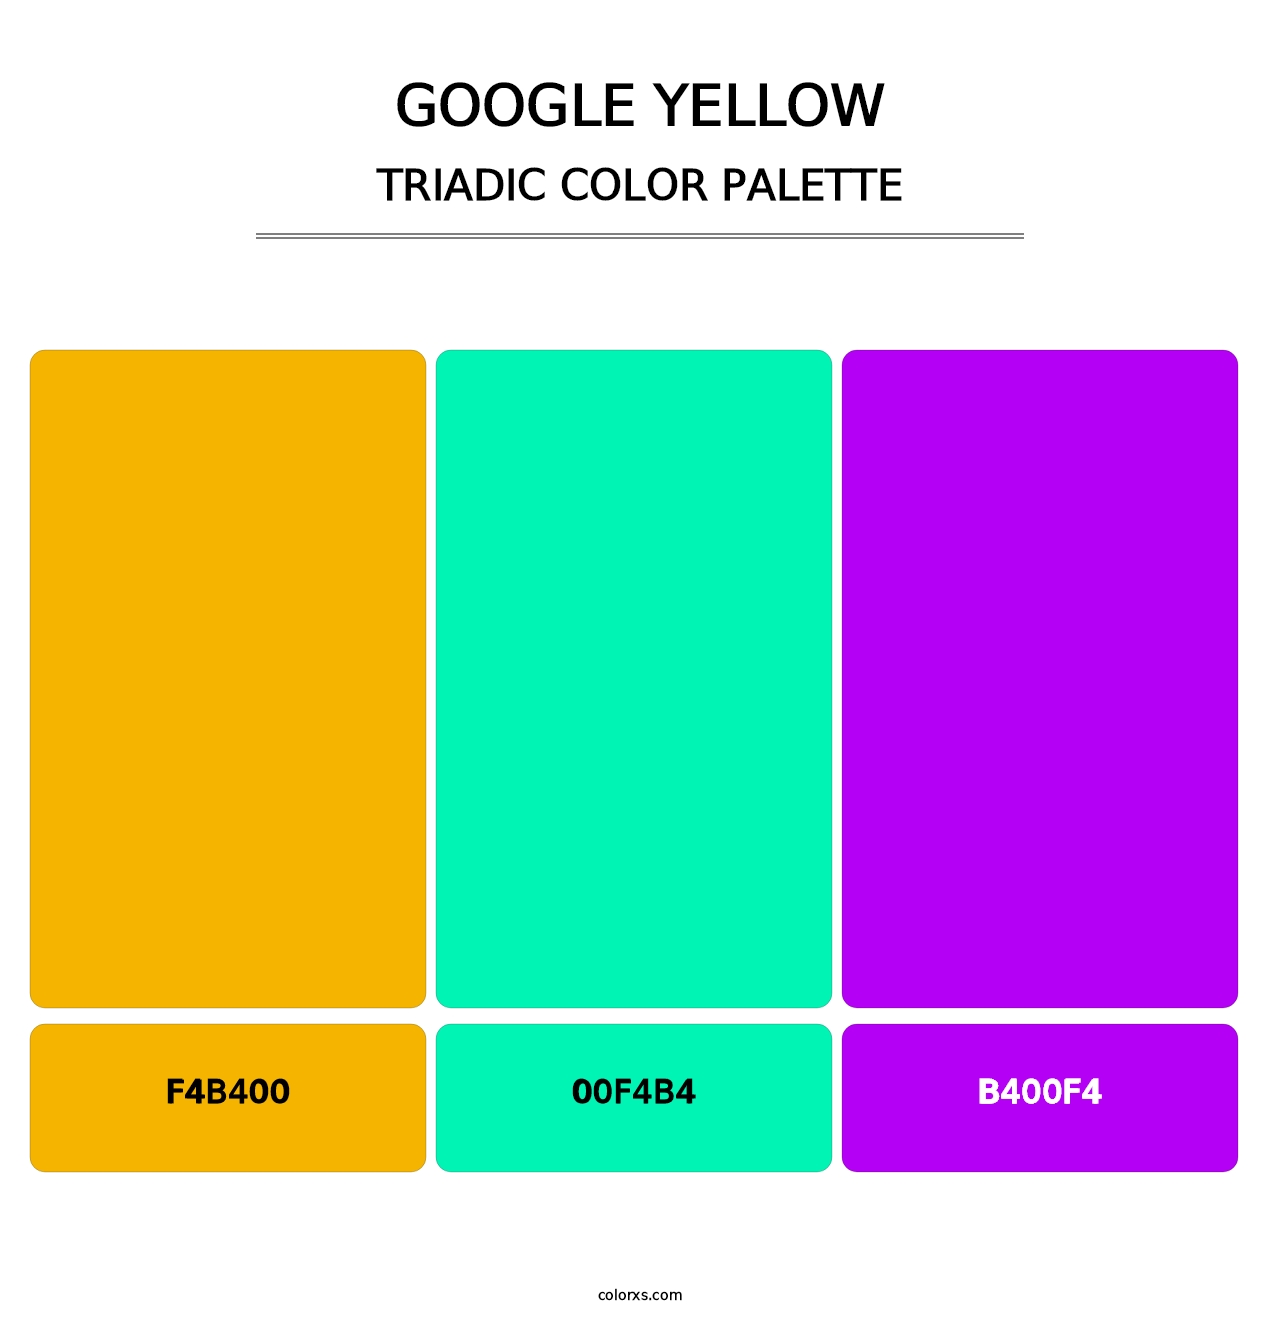 Google Yellow - Triadic Color Palette